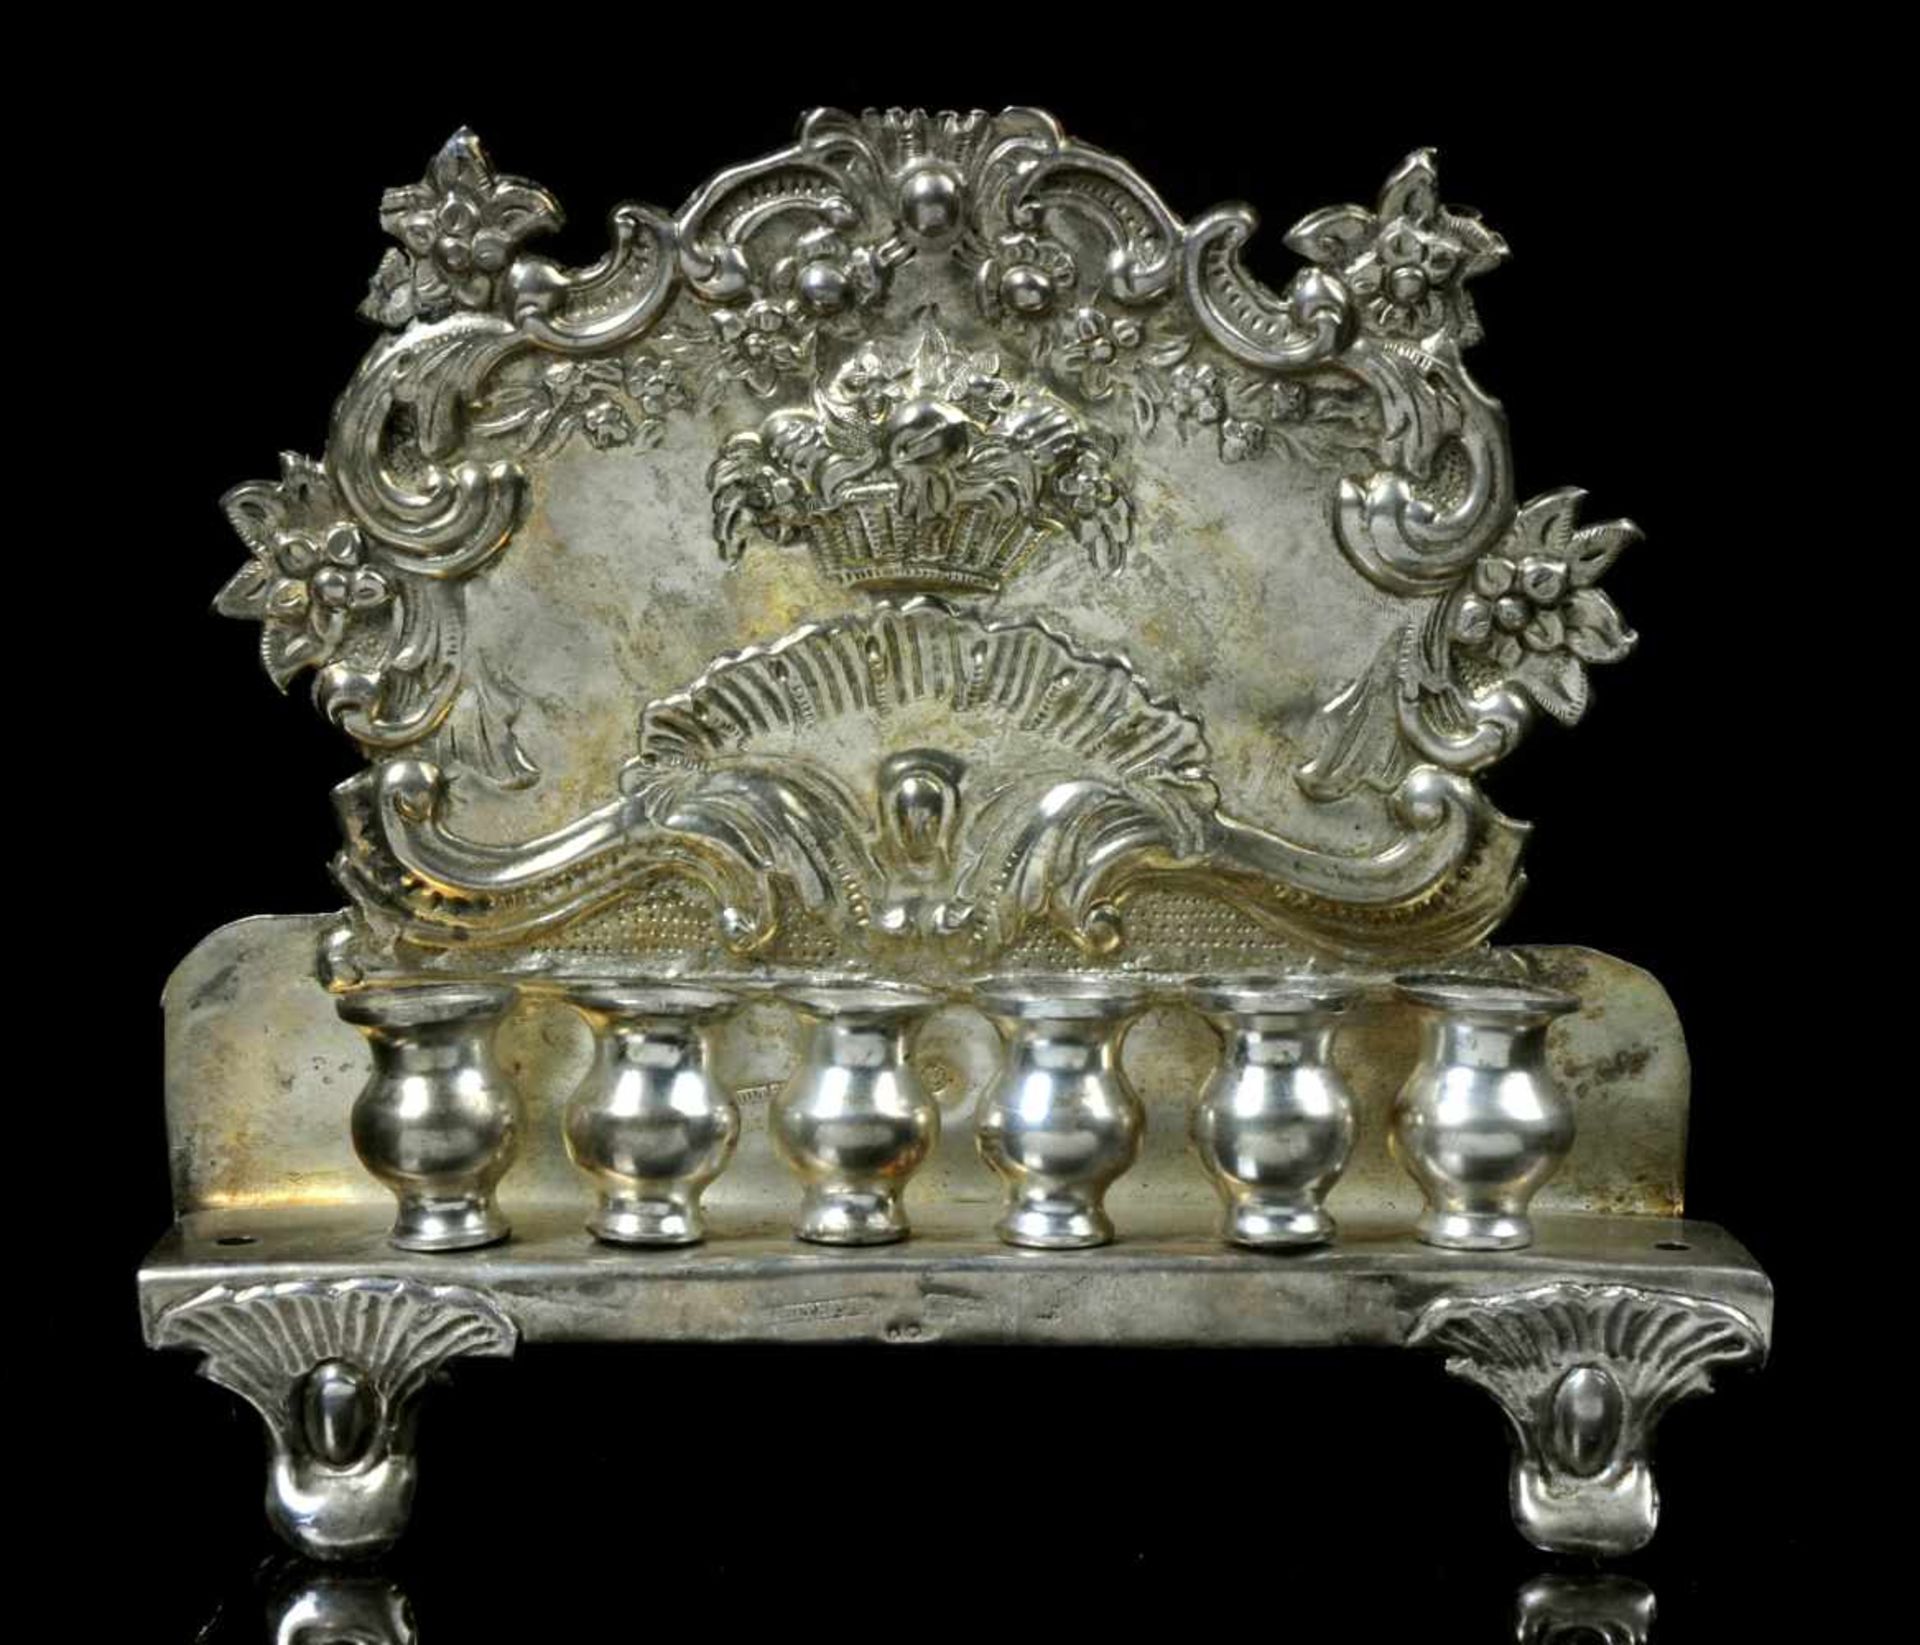 A POLISH / IMPERIAL RUSSIAN SILVER HANNUKAH LAMP, M.SZTERN, WARSAW, 1880, JUDAICA.Made of .875